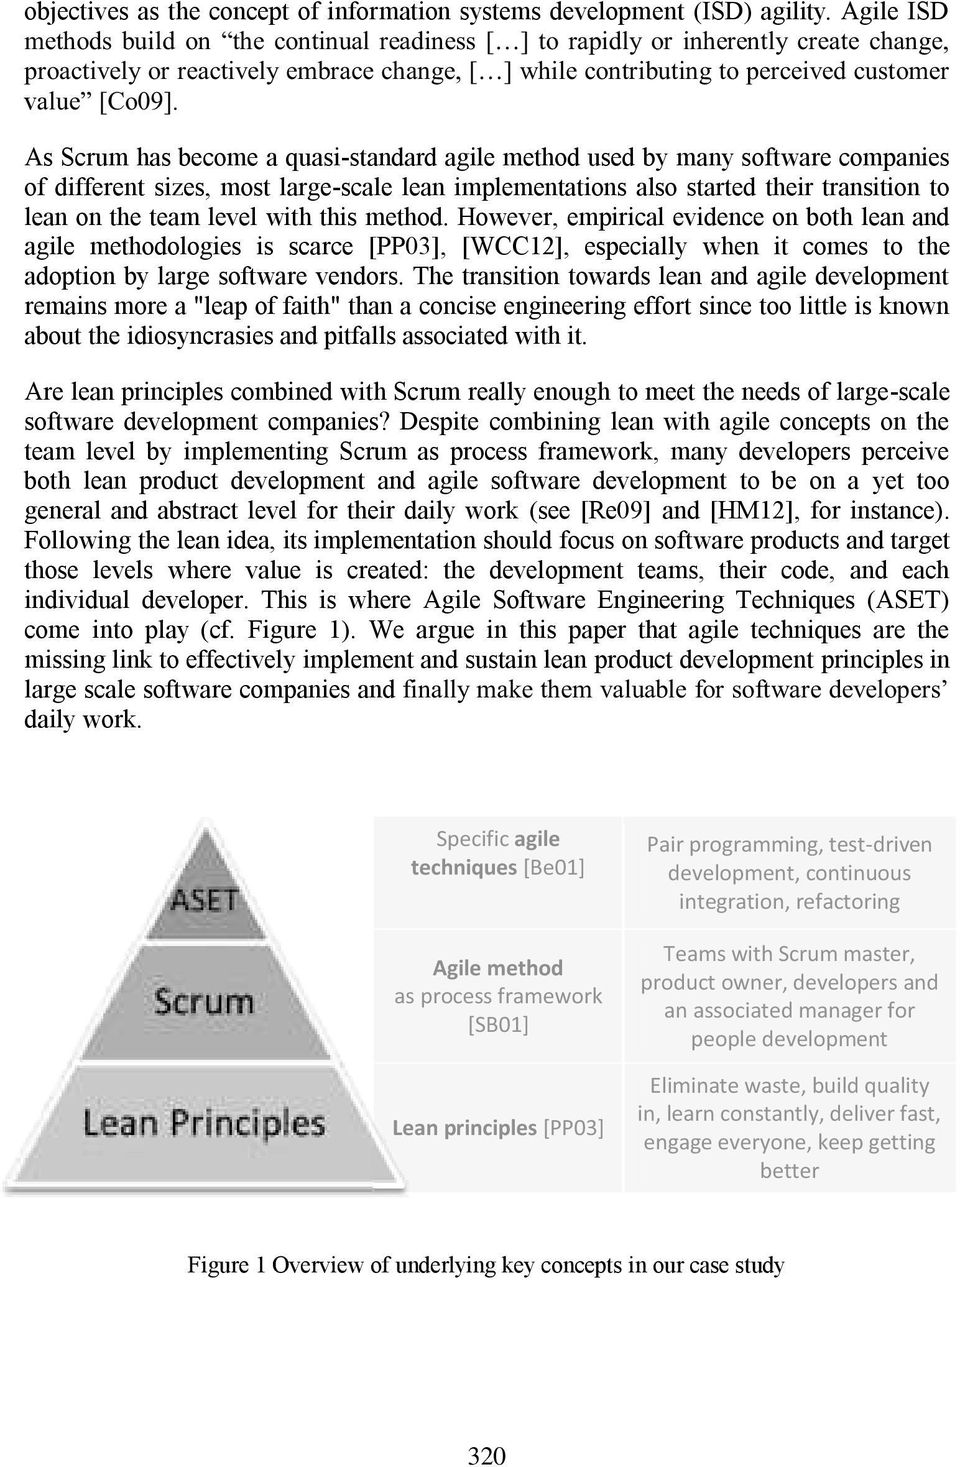 As Scrum has become a quasi-standard agile method used by many software companies of different sizes, most large-scale lean implementations also started their transition to lean on the team level